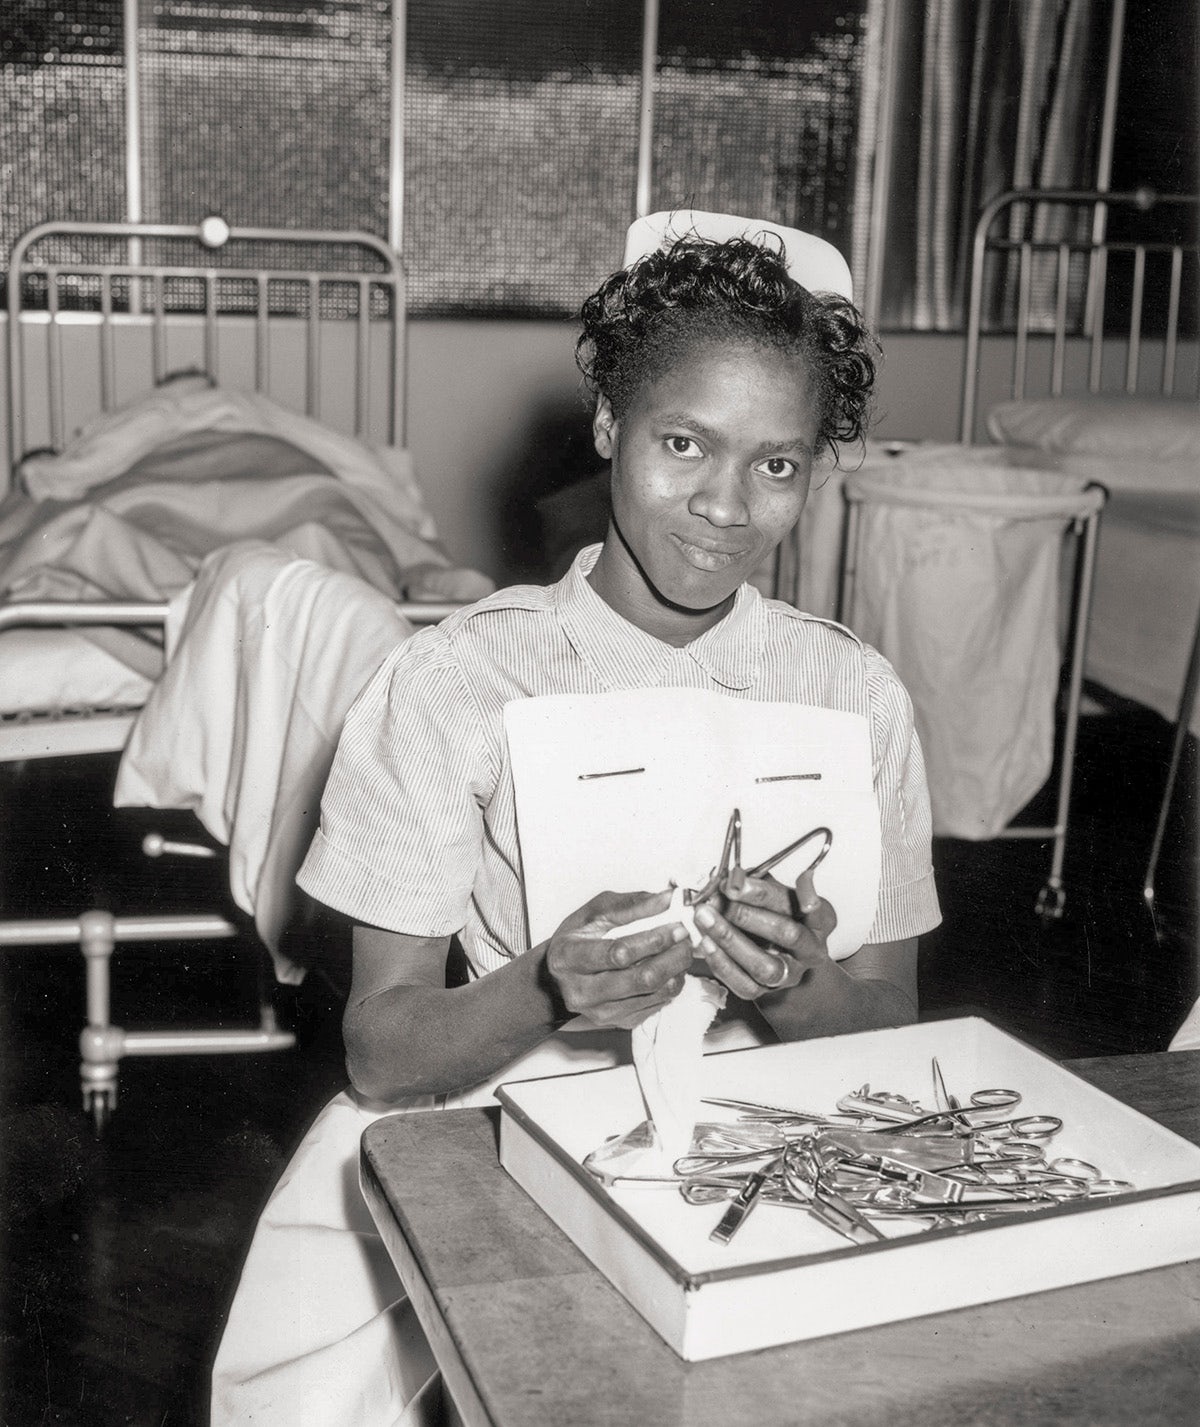 Black and white photograph of an NHS nurse polishing a tray of pincers and other tools